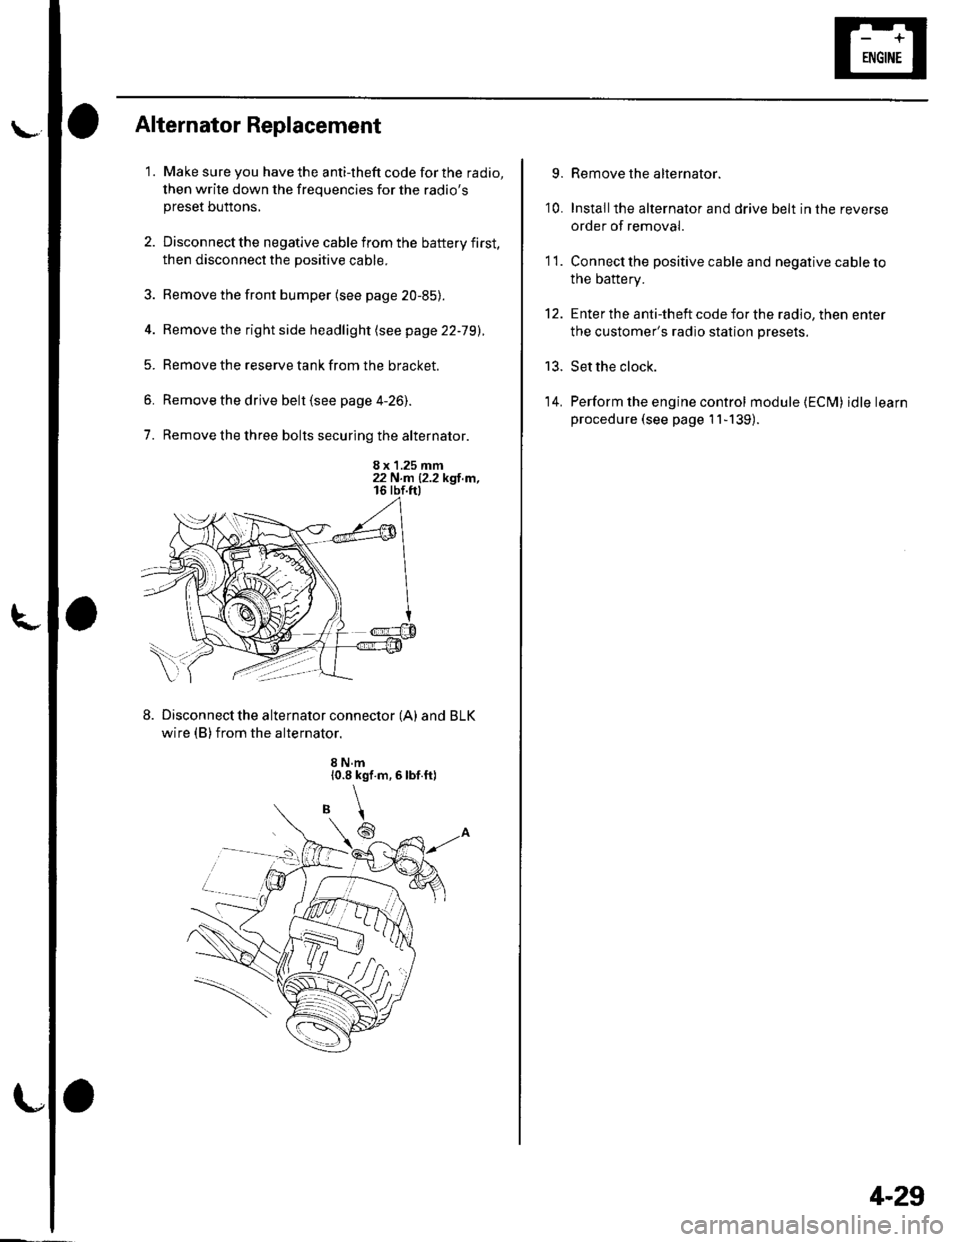 HONDA CIVIC 2003 7.G User Guide l\-Alternator Replacement
1. Make sure you have the anti-theft code for the radio,
then write down the frequencies for the radiospreset buttons,
2. Disconnect the negative cable from the battery firs